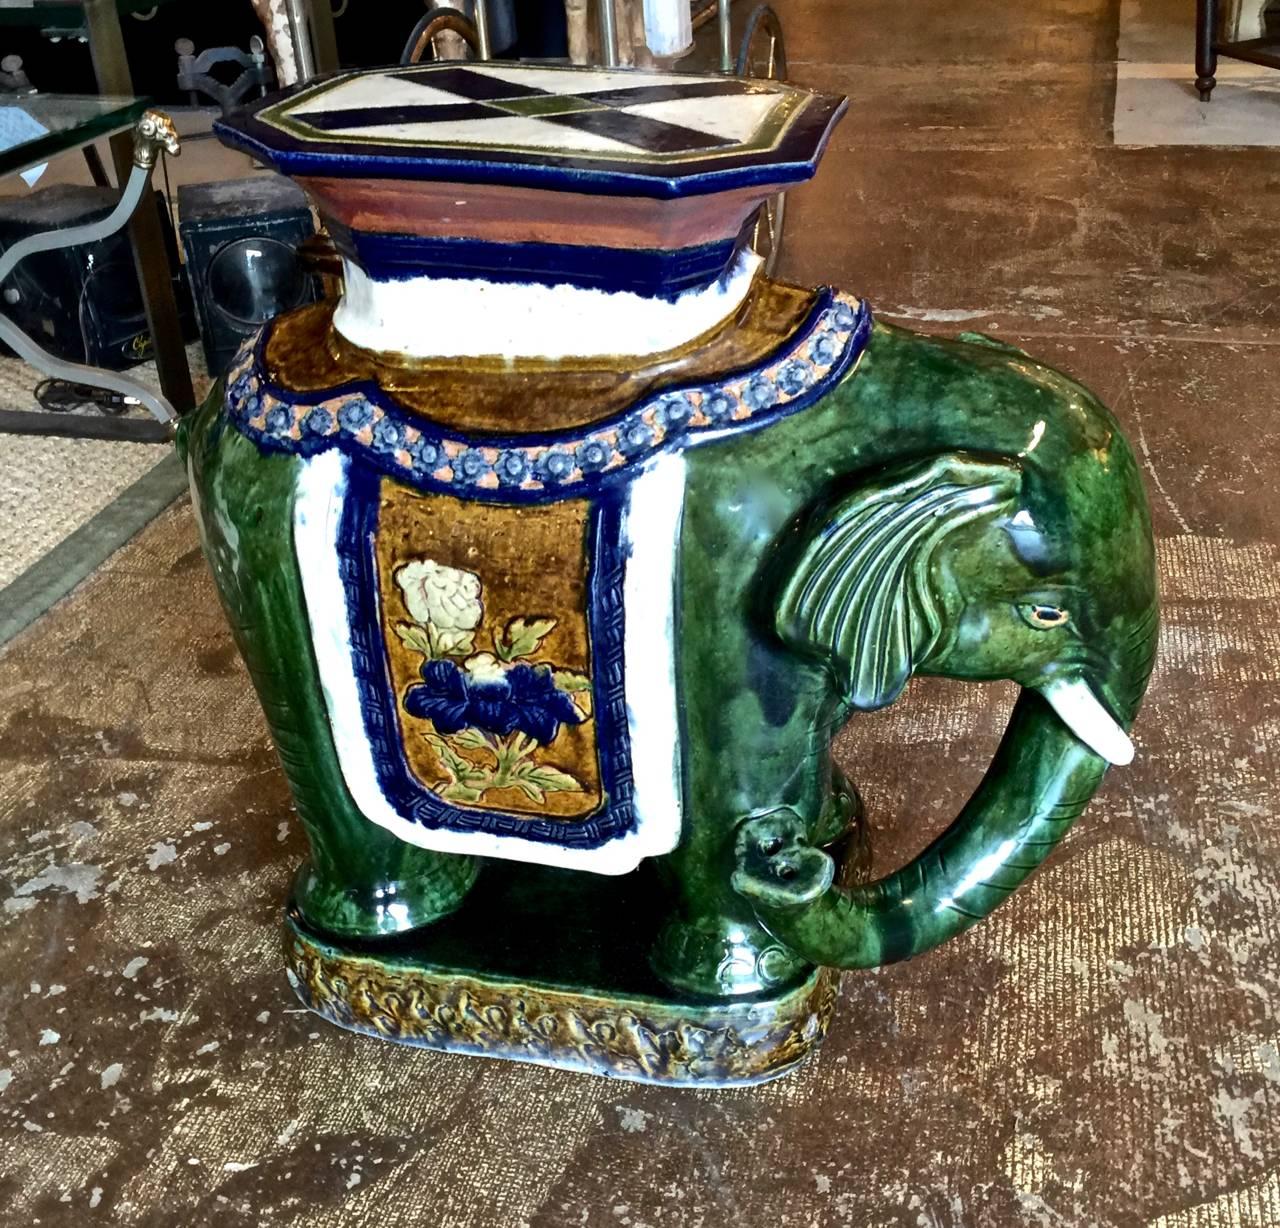 This is a great pair of circa 1950s glazed elephant stools or tables. The stools are well-detailed and in overall excellent condition, considering their age and use. The opposing elephants are glazed in a beautiful mottled green with deep blue